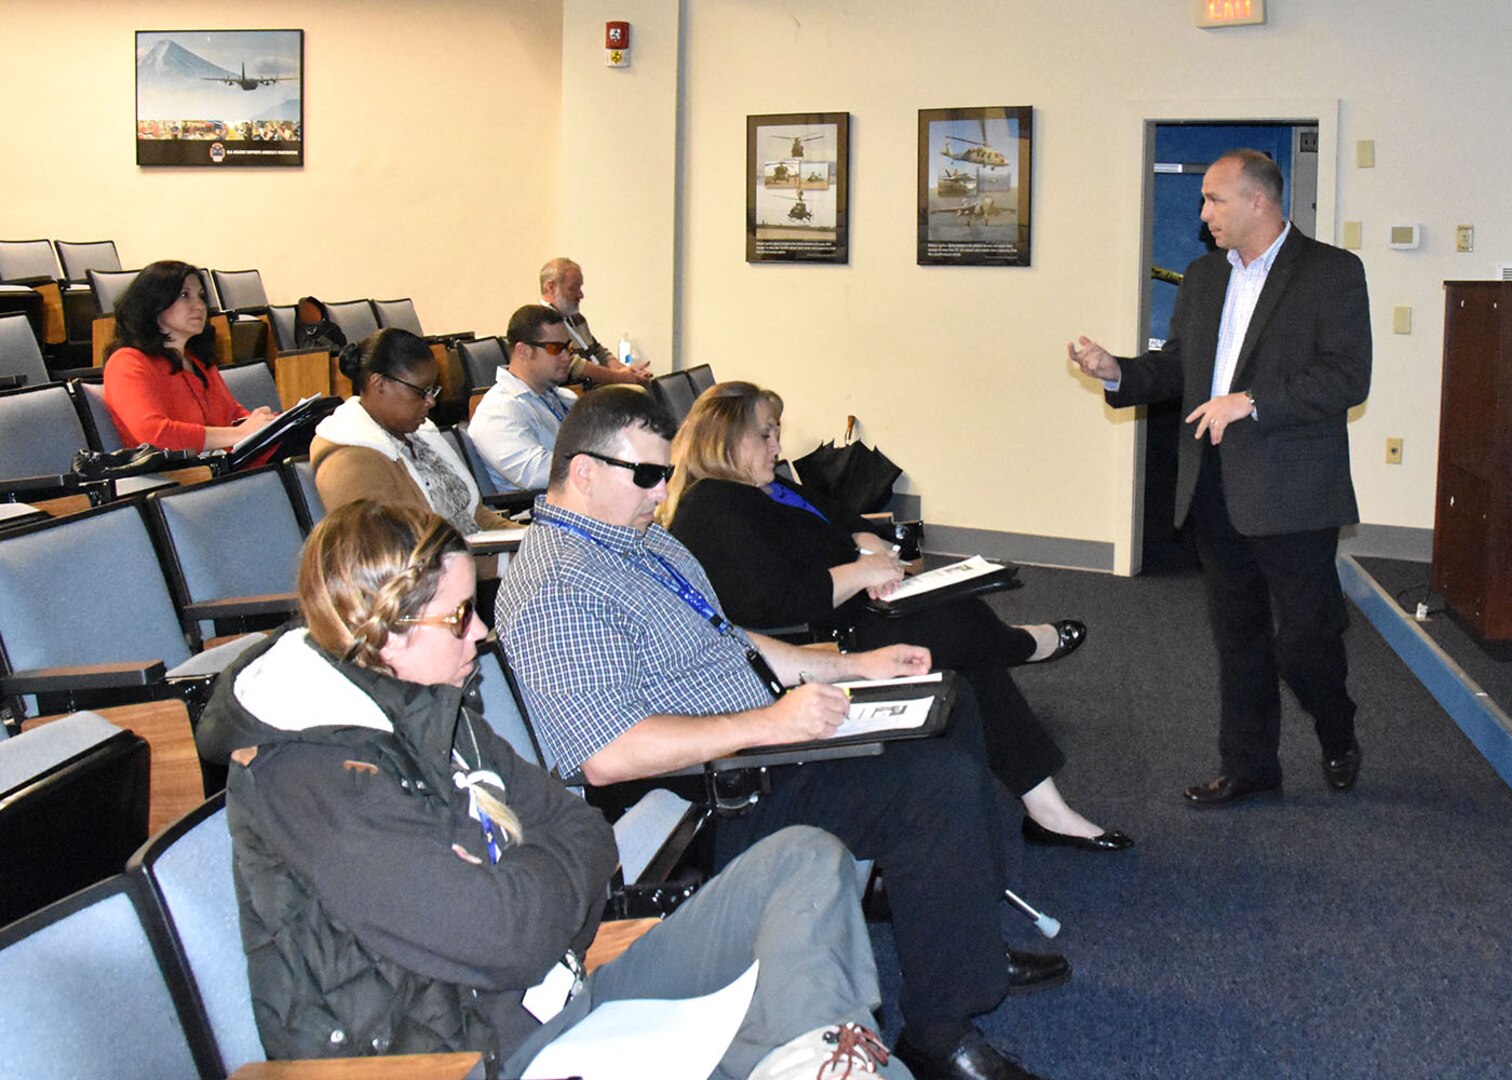 DLA Forward Presence Human Resource Manager Rocky Weaver gives a resume building brief during a workshop May 23, 2016 for wounded warriors, currently undergoing treatment at the Hunter Holmes McGuire VA Medical Center in Richmond, Virginia, helping them navigate civilian job application websites and prepare professional resumes. 